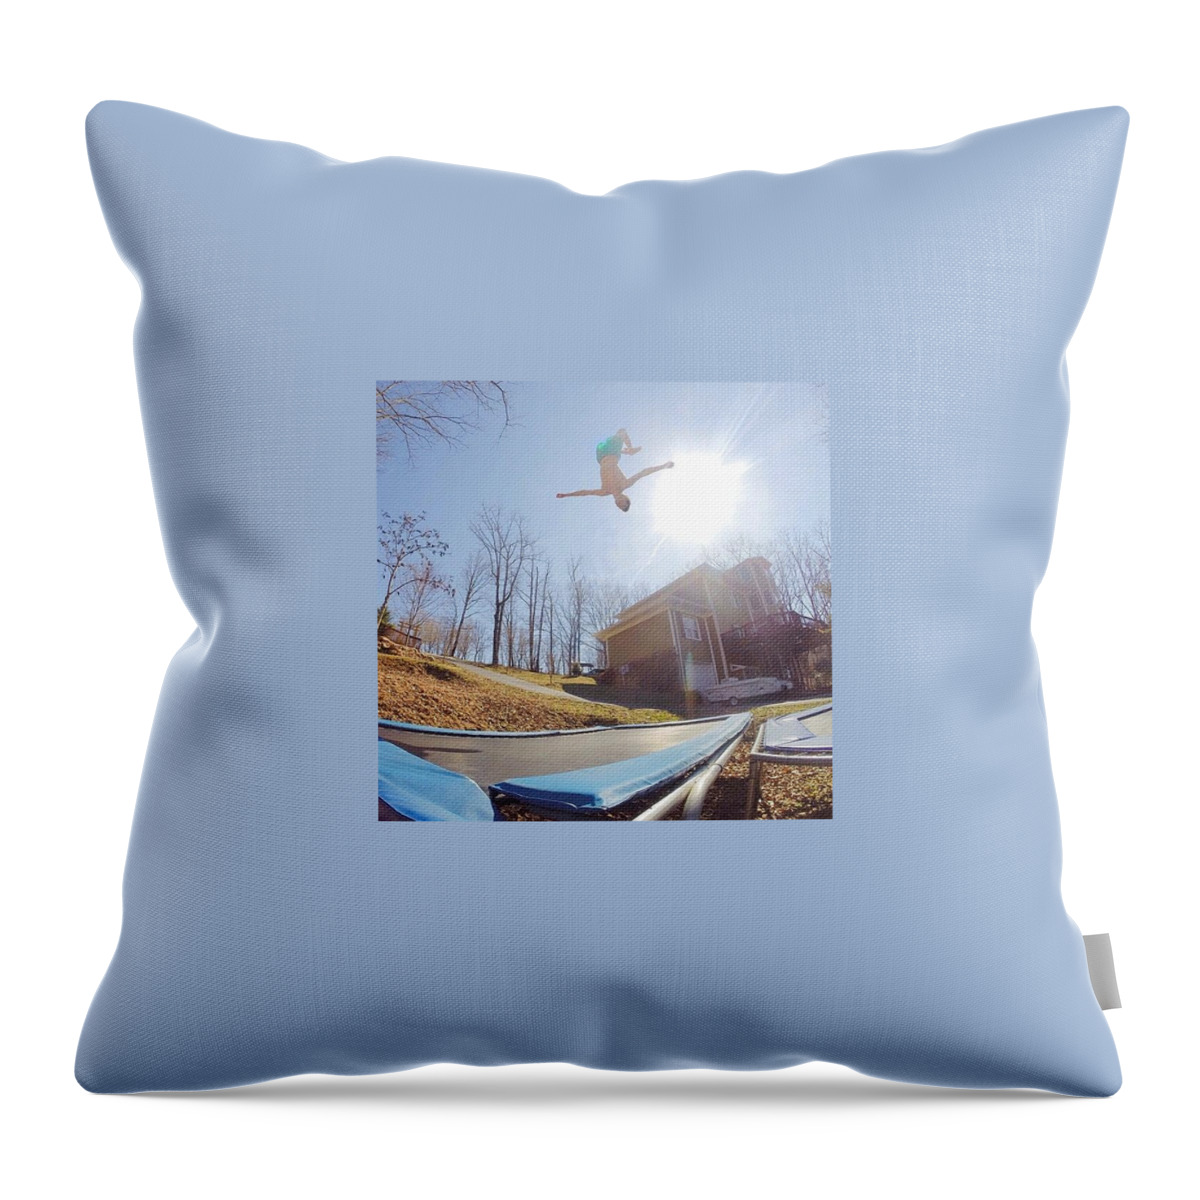 Gopro Throw Pillow featuring the photograph Big Air by Eric Decker